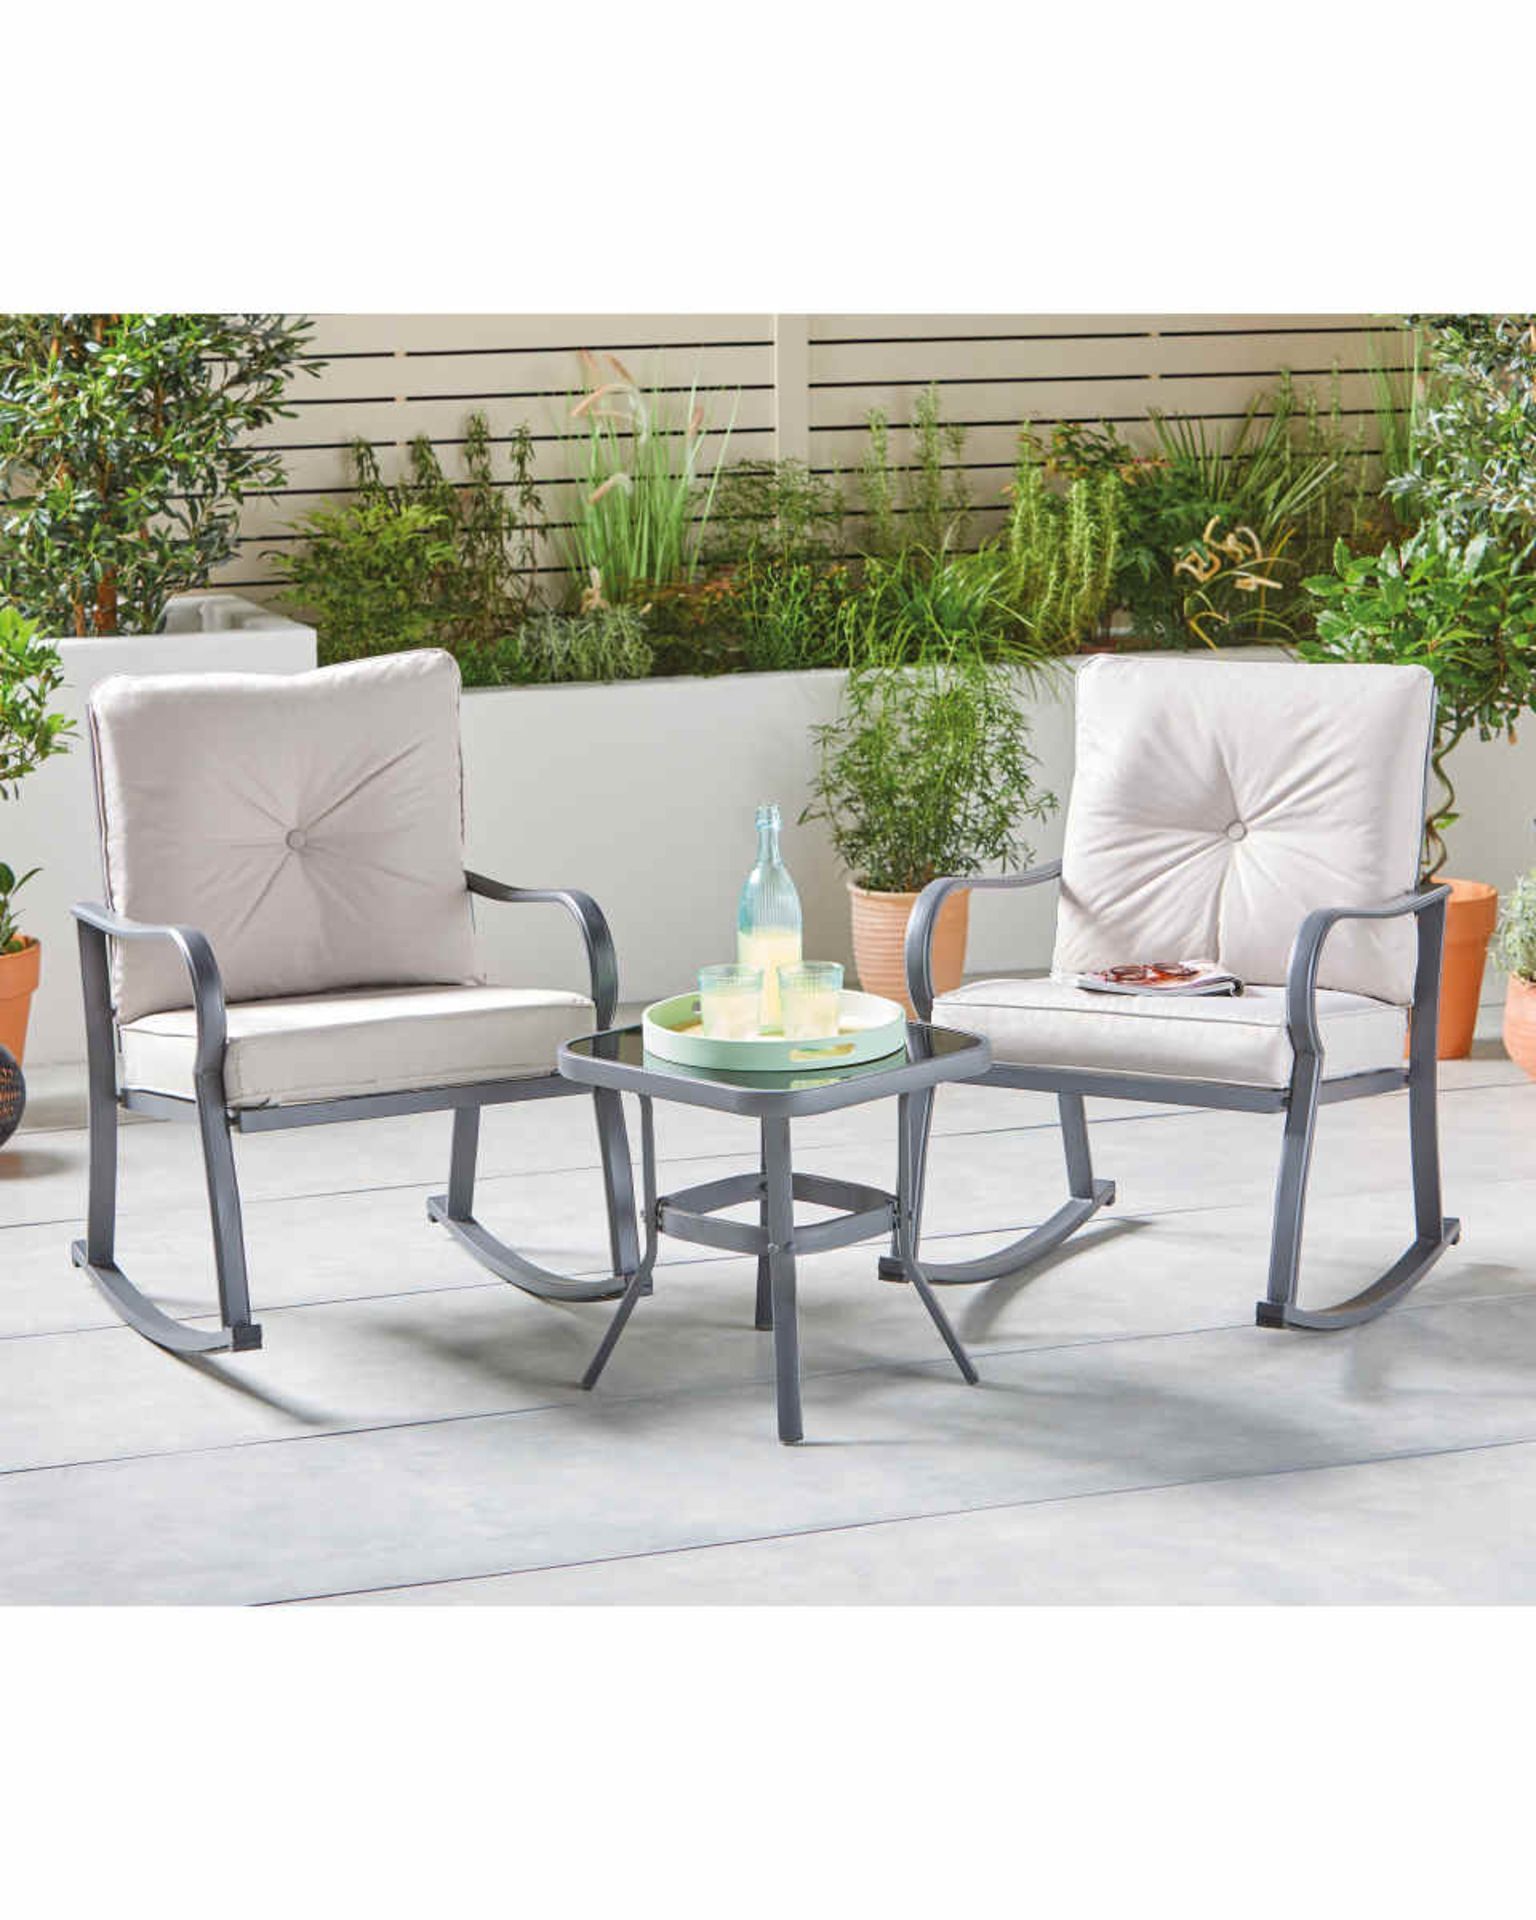 Luxury Rocking Bistro Set. Sit back and rock away in style with this stunning Luxury Rocking - Image 2 of 2